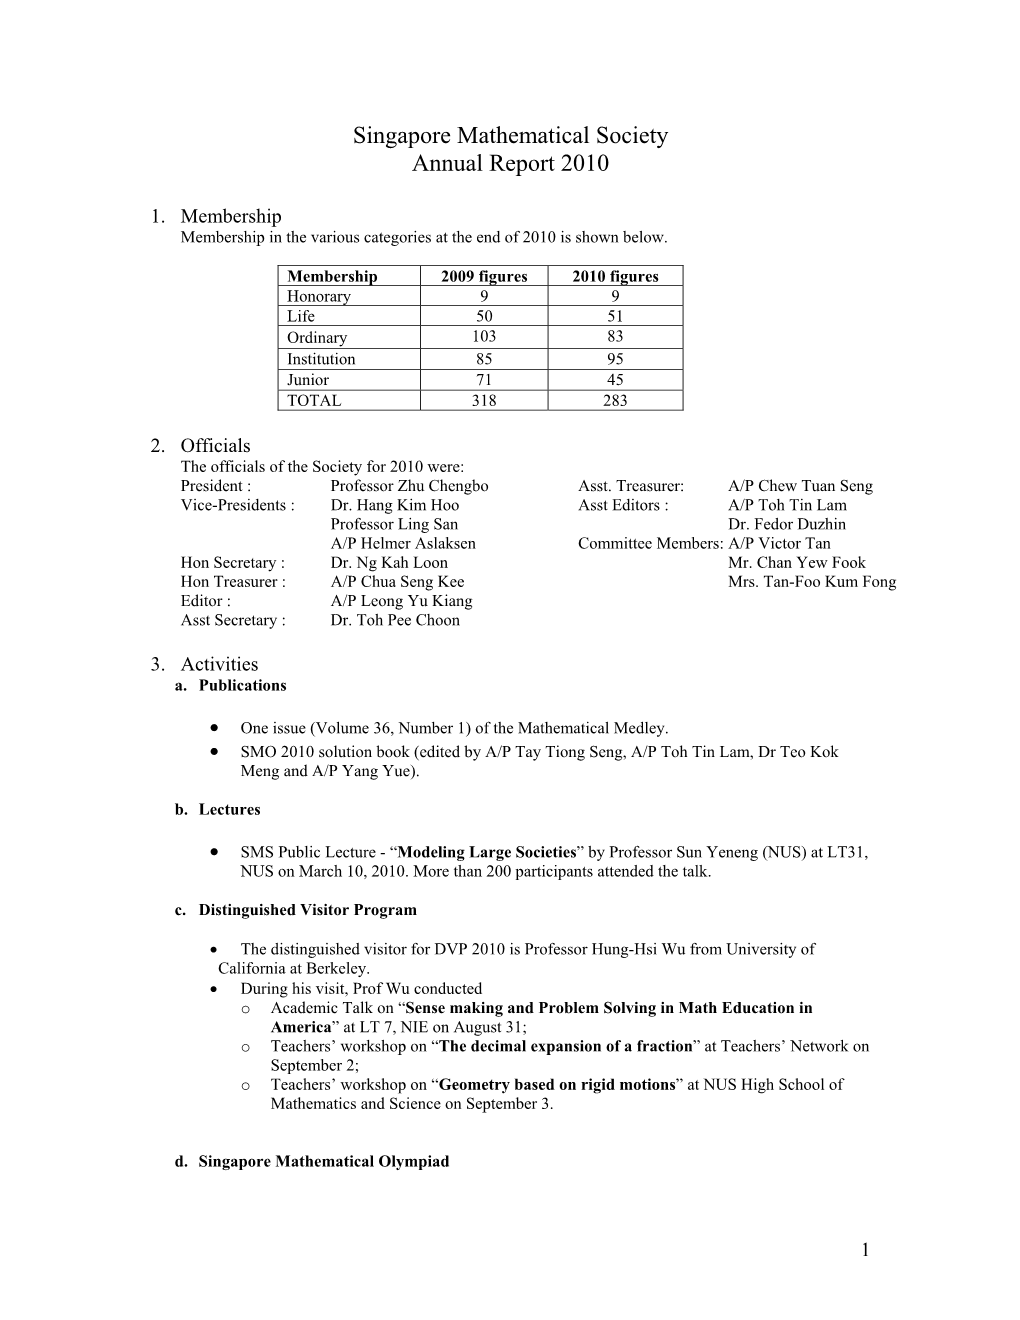 Singapore Mathematical Society Annual Report 2010